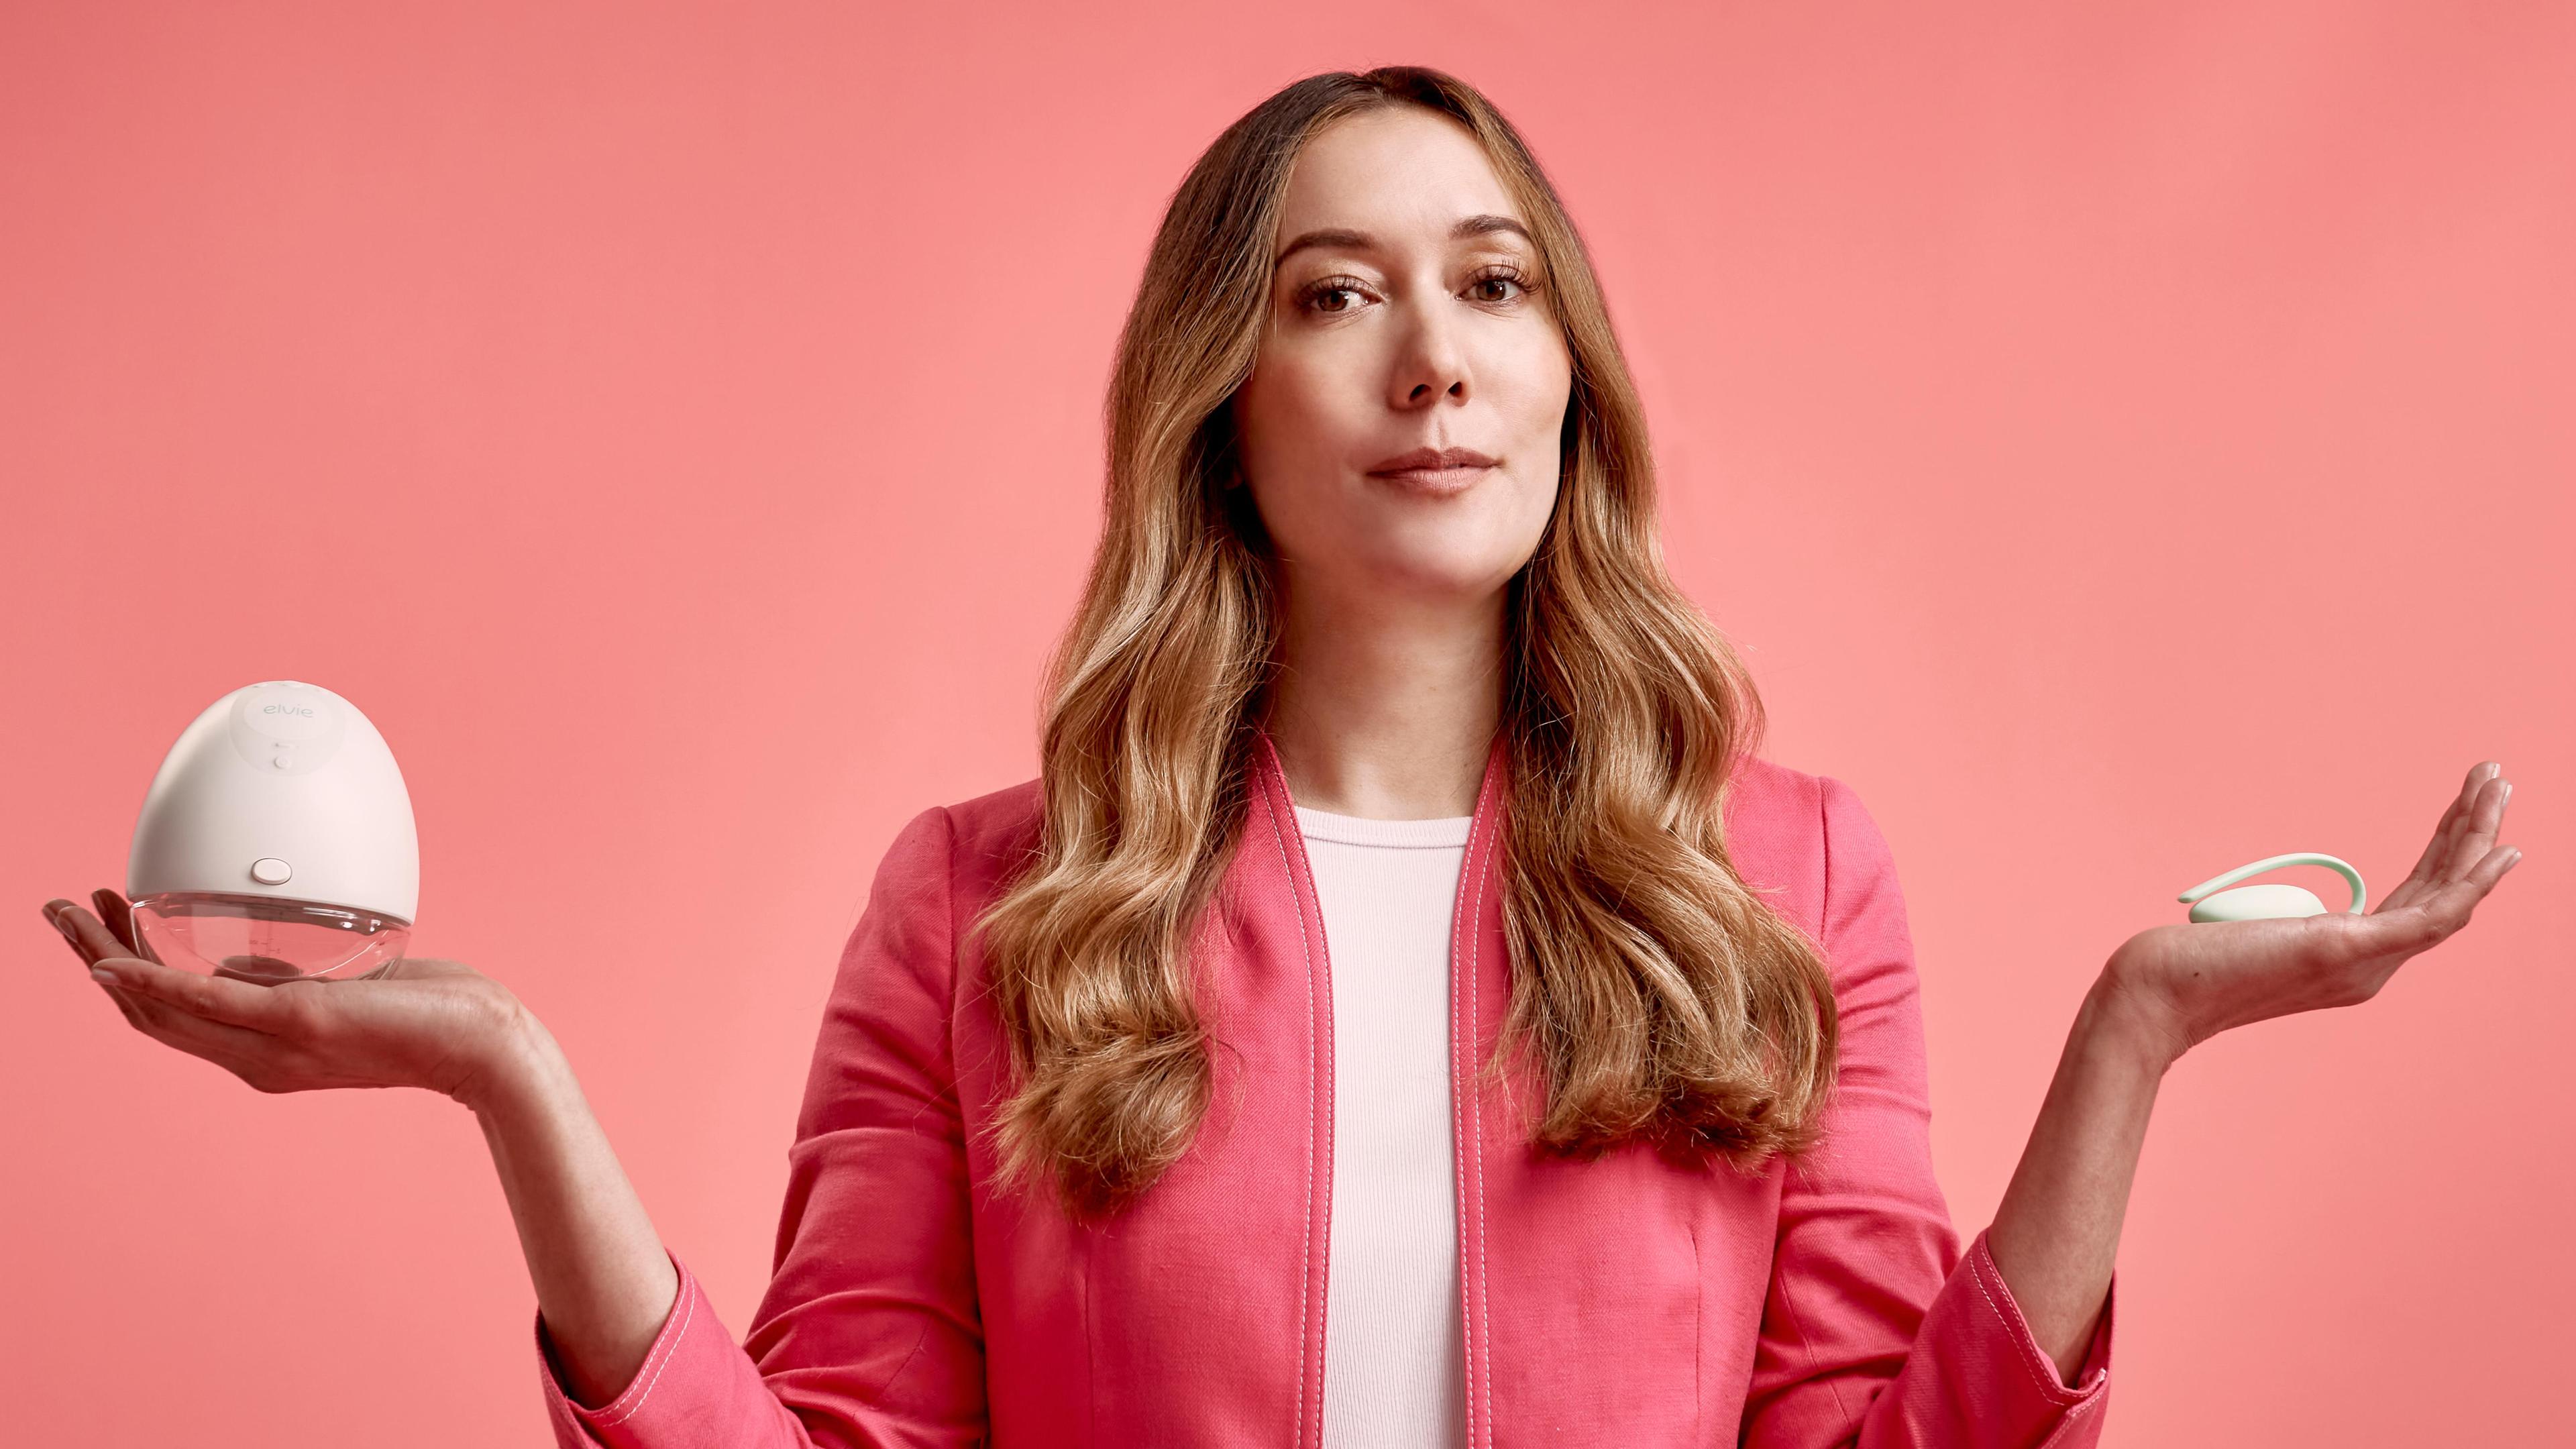 A woman in a pink blazer over a lighter pink top stands against a coral pink background, holding a white egg-shaped device on her left palm and a small circular device on her right palm. Her expression is neutral.